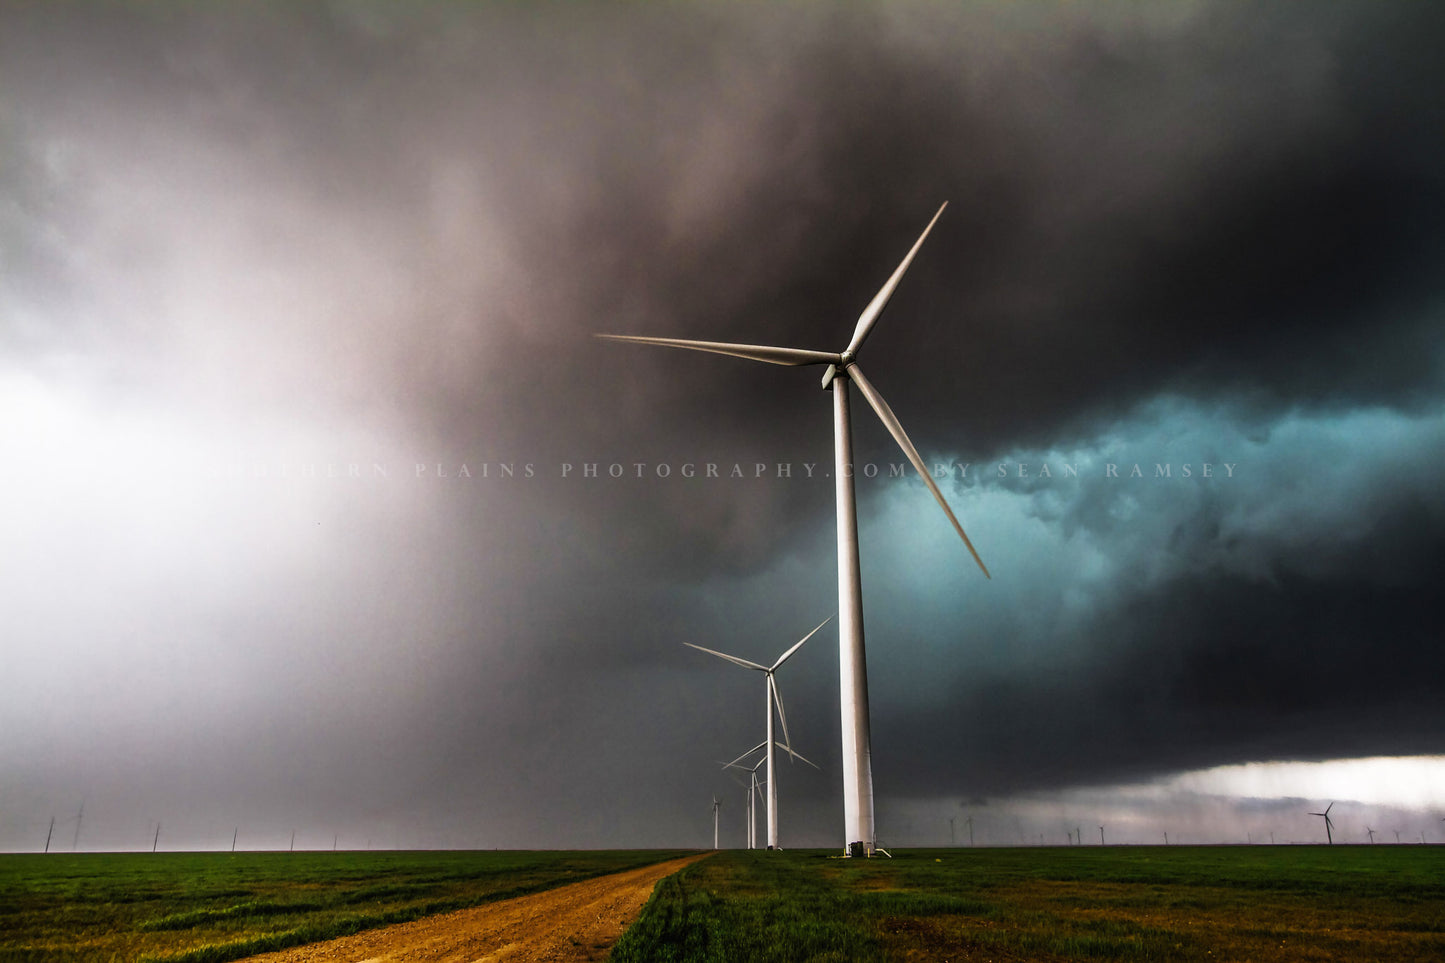 Storm photography print of wind turbines churning through an intense thunderstorm on a spring day in the Texas panhandle by Sean Ramsey of Southern Plains Photography.